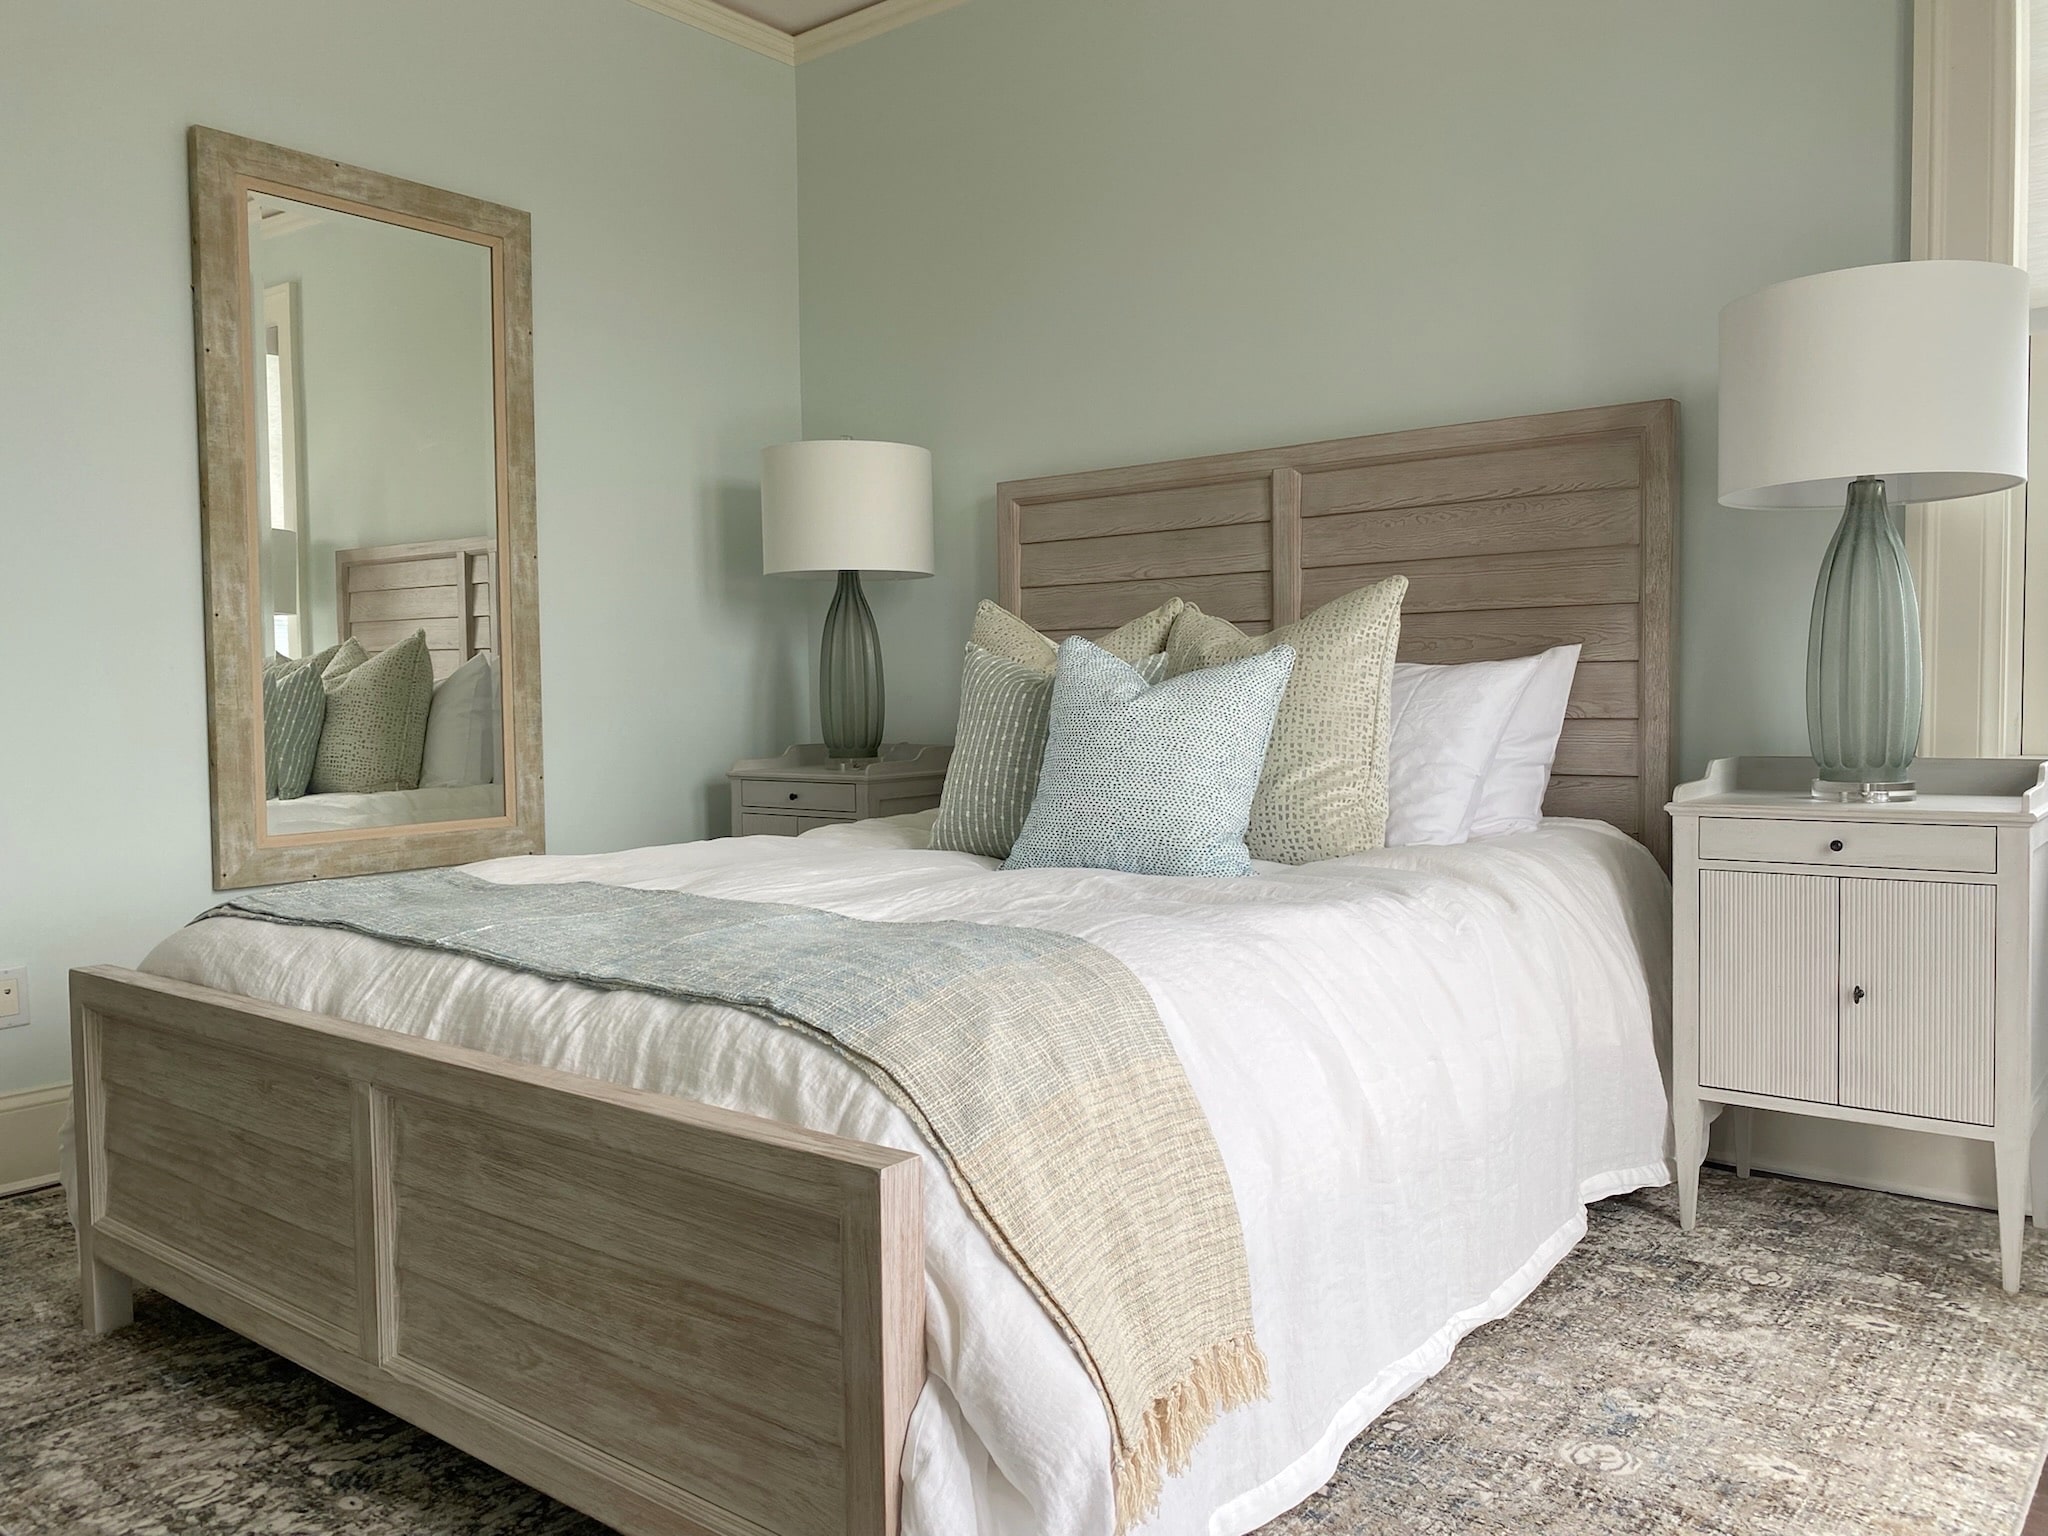 A bedroom with light blue walls and a white bed, designed with an appealing interior design.